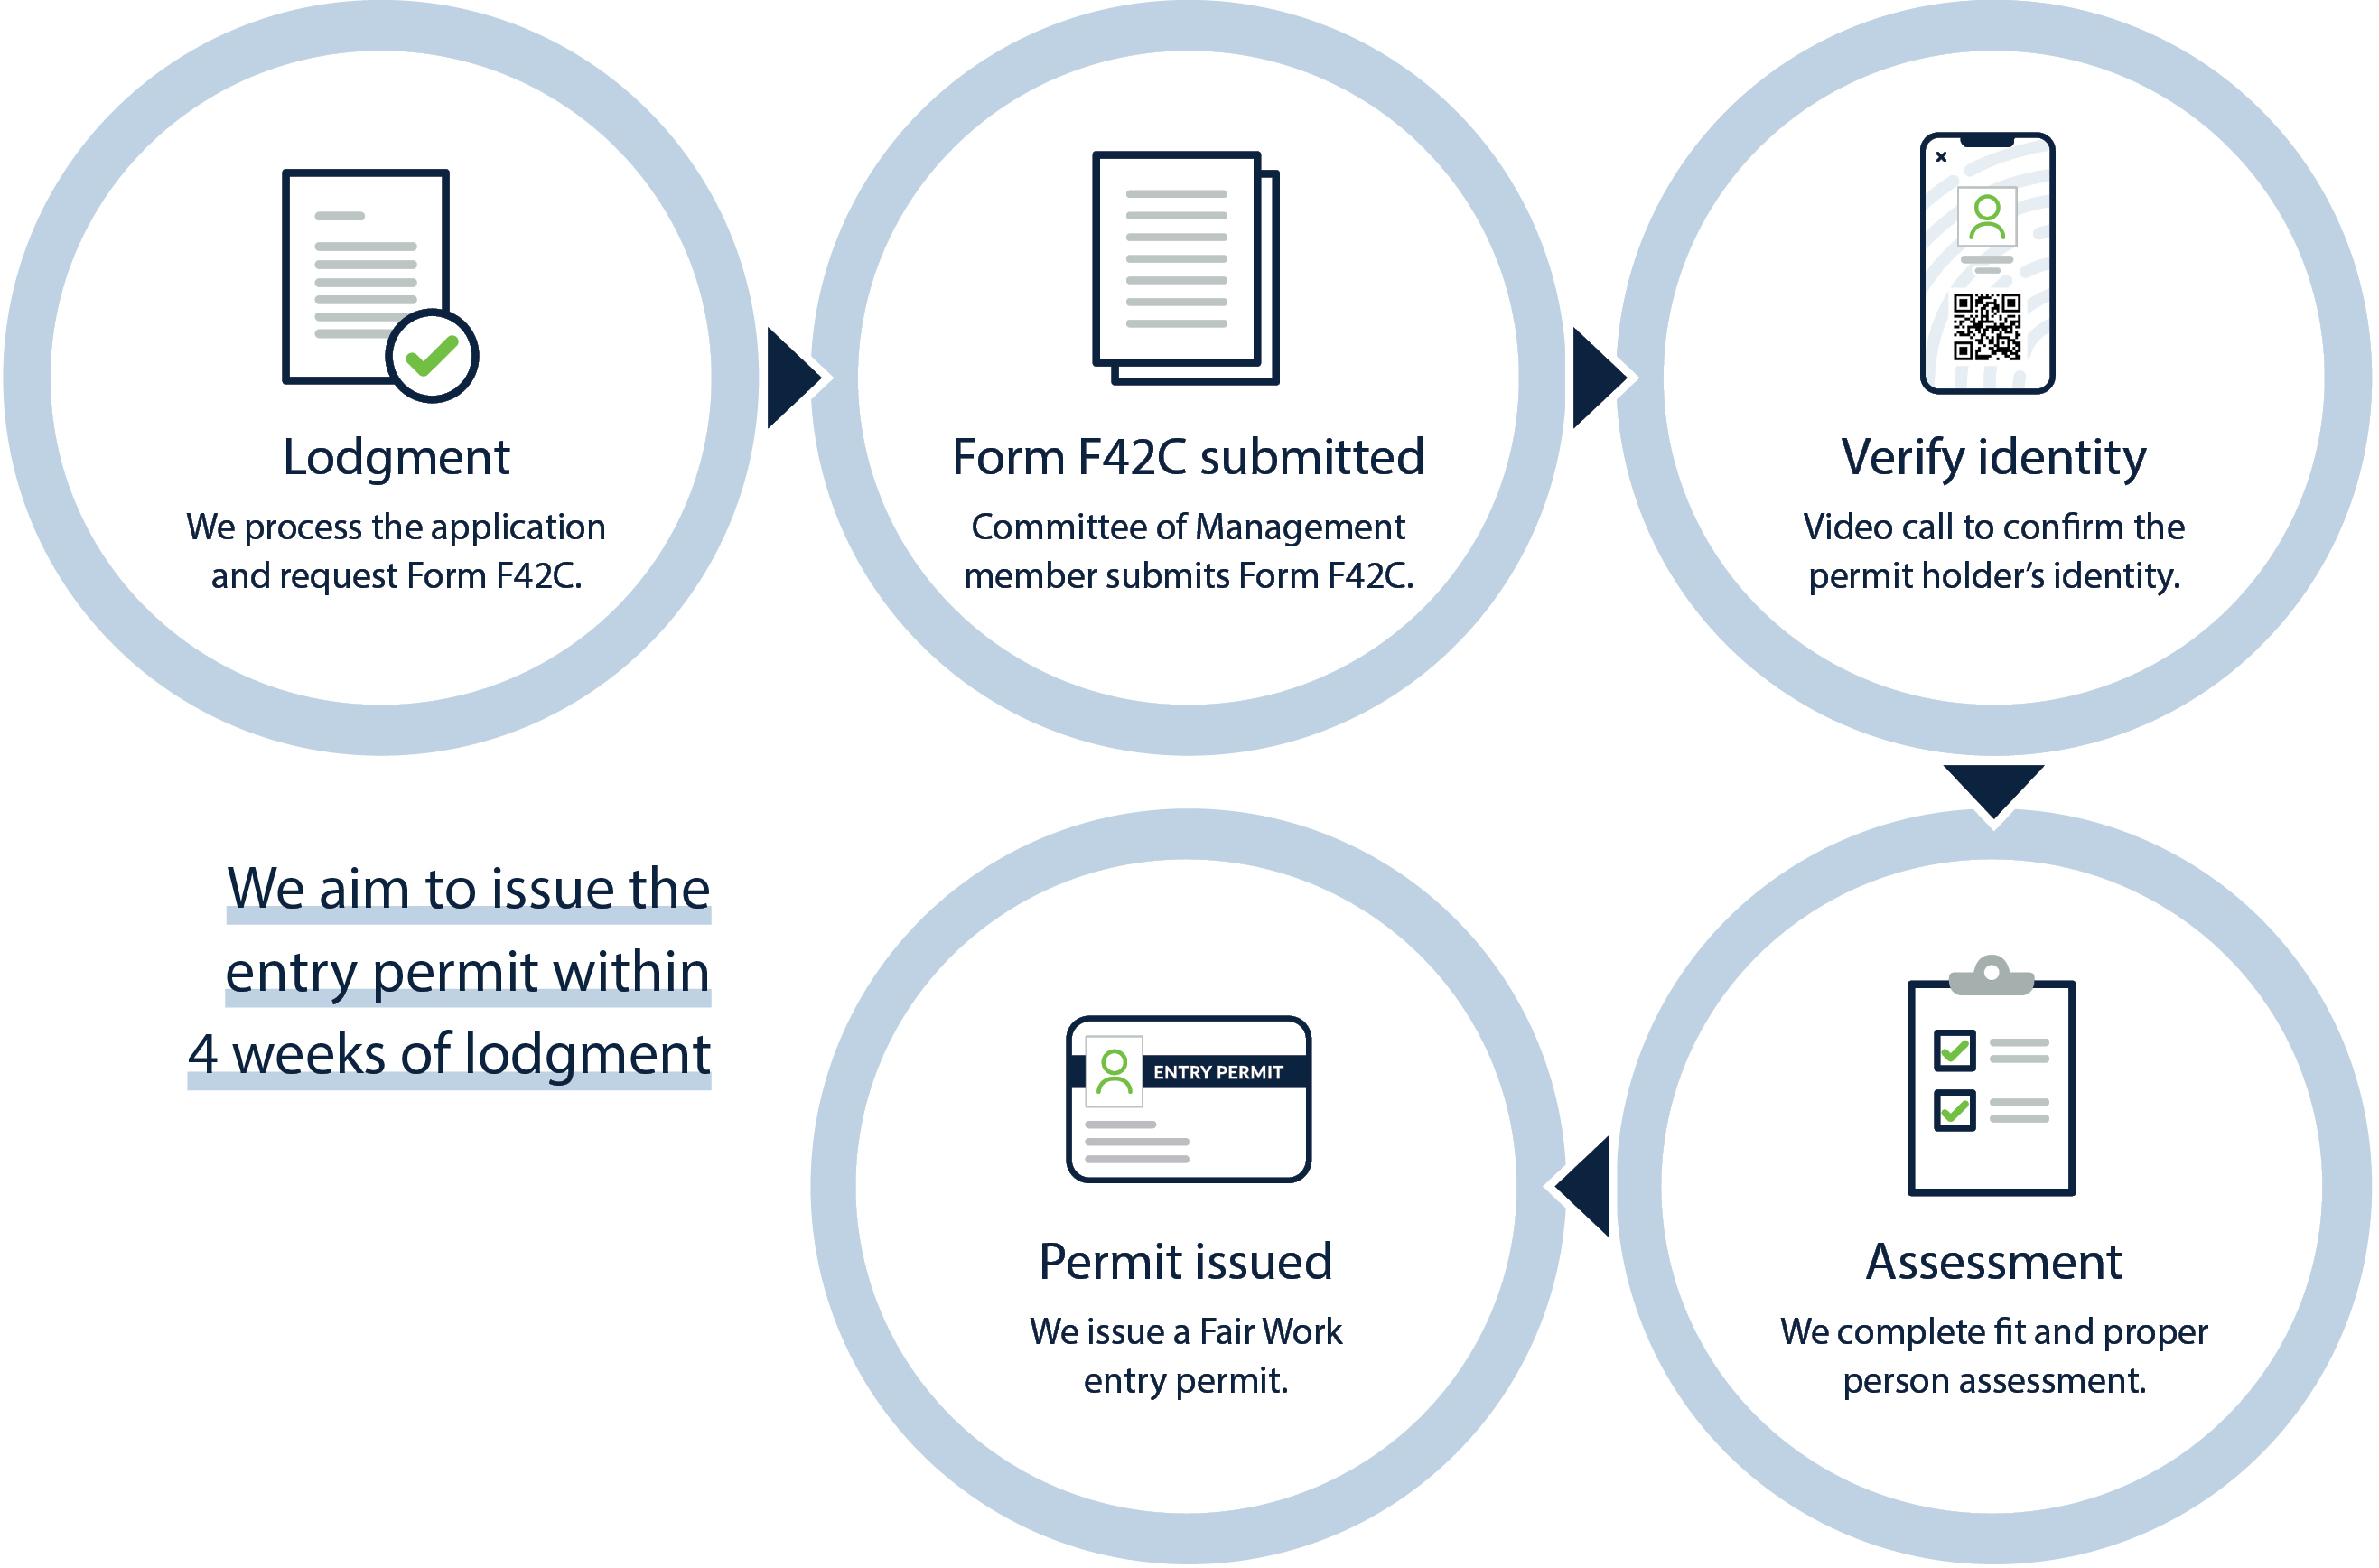 Infographic depicting the process for right of entry permit applications. Full details are available on the page.